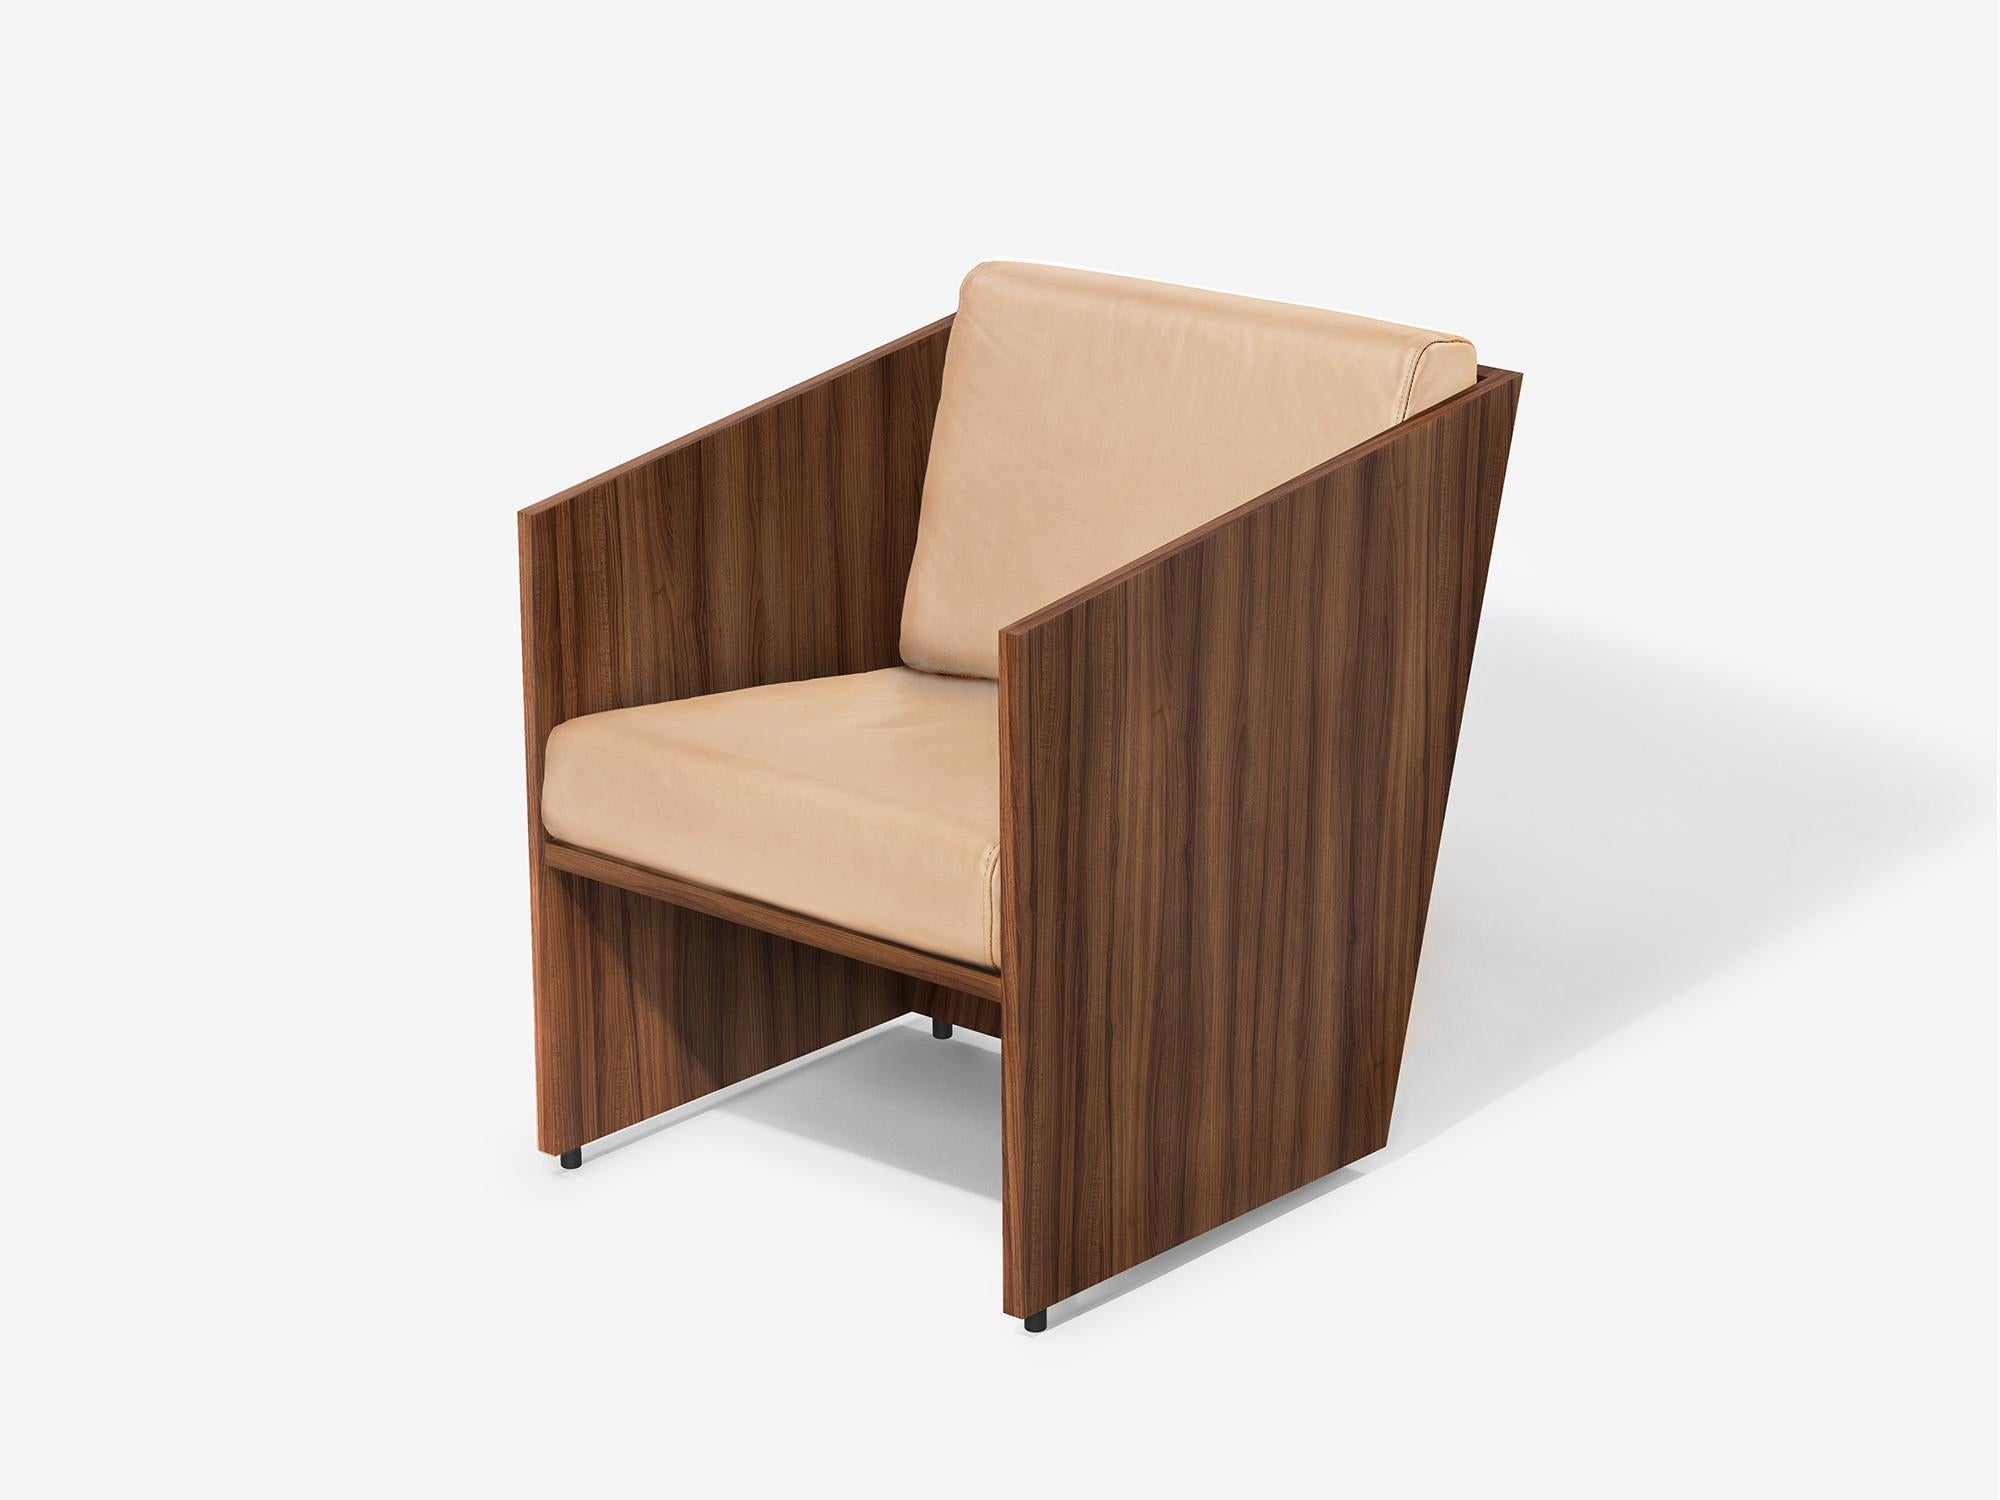 Hand-Crafted Álvaro Siza Vieira - Armchair in Walnut Wood and Brown Leather - one of a kind For Sale